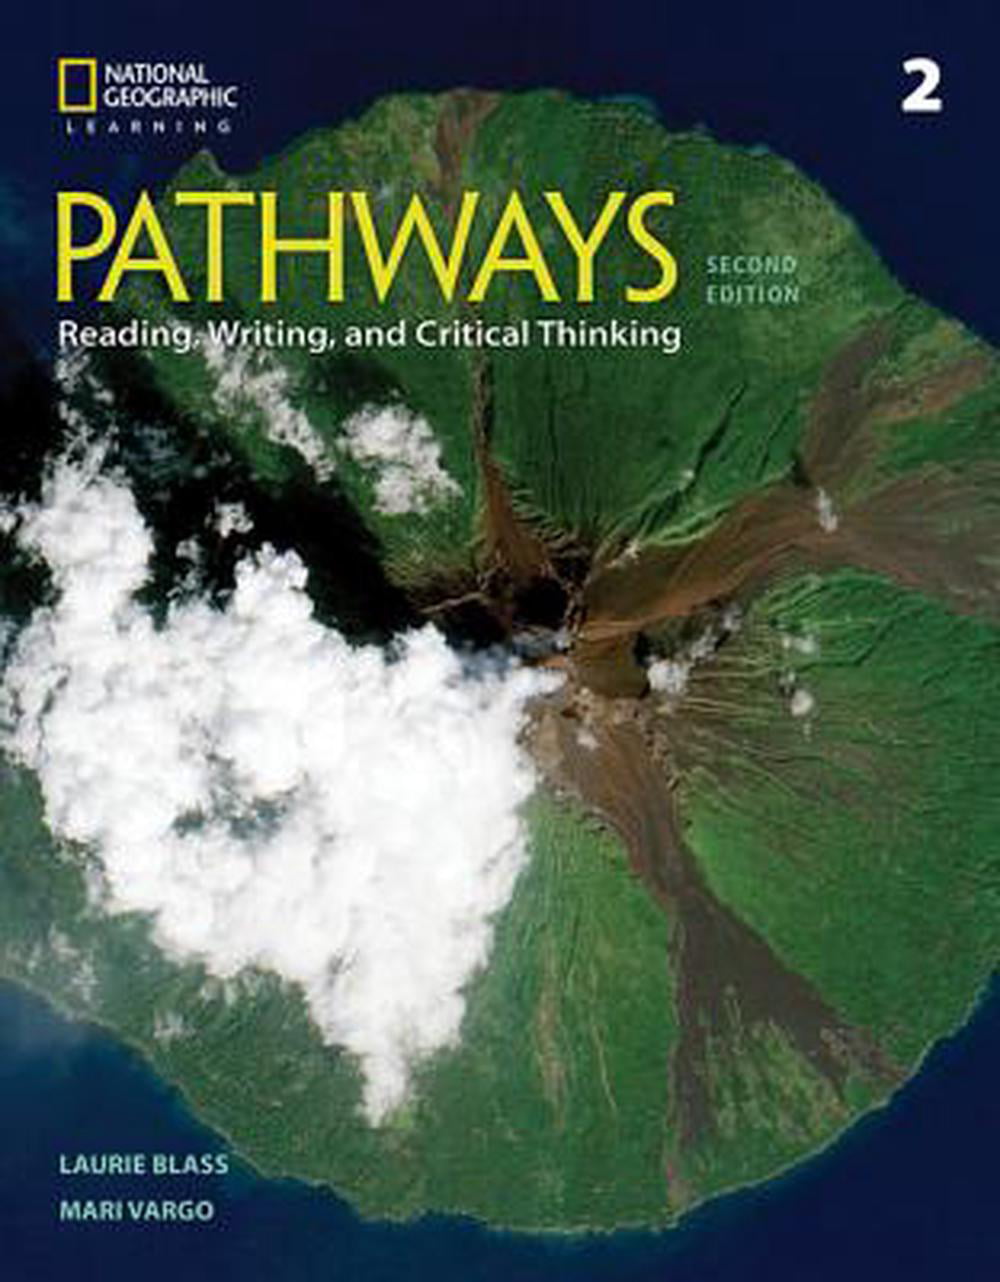 pathways reading writing and critical thinking 2nd edition pdf